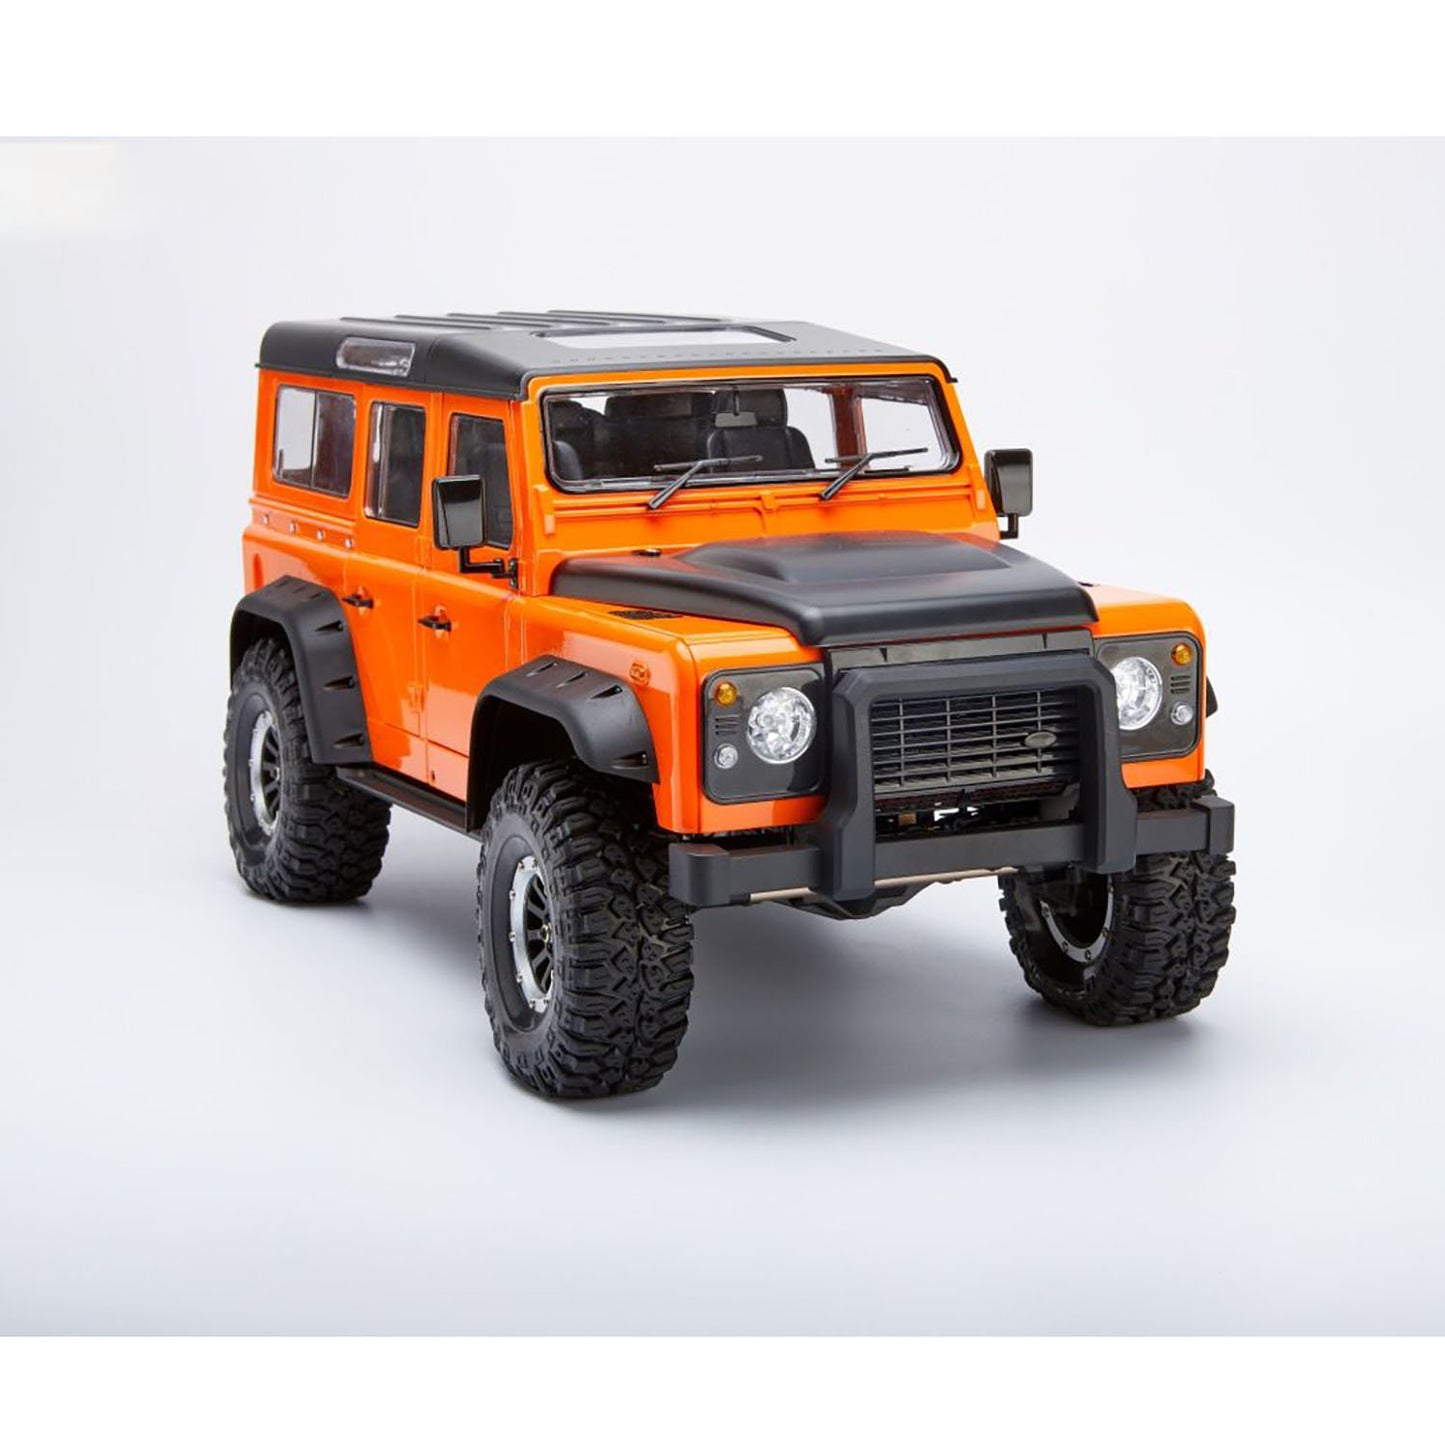 IN STOCK 1/10 YIKONG 4x4 Painted RC Crawler Remote Controlled Off Road Car 2Speed Radio Motor ESC Servo DIY Vehicle Models